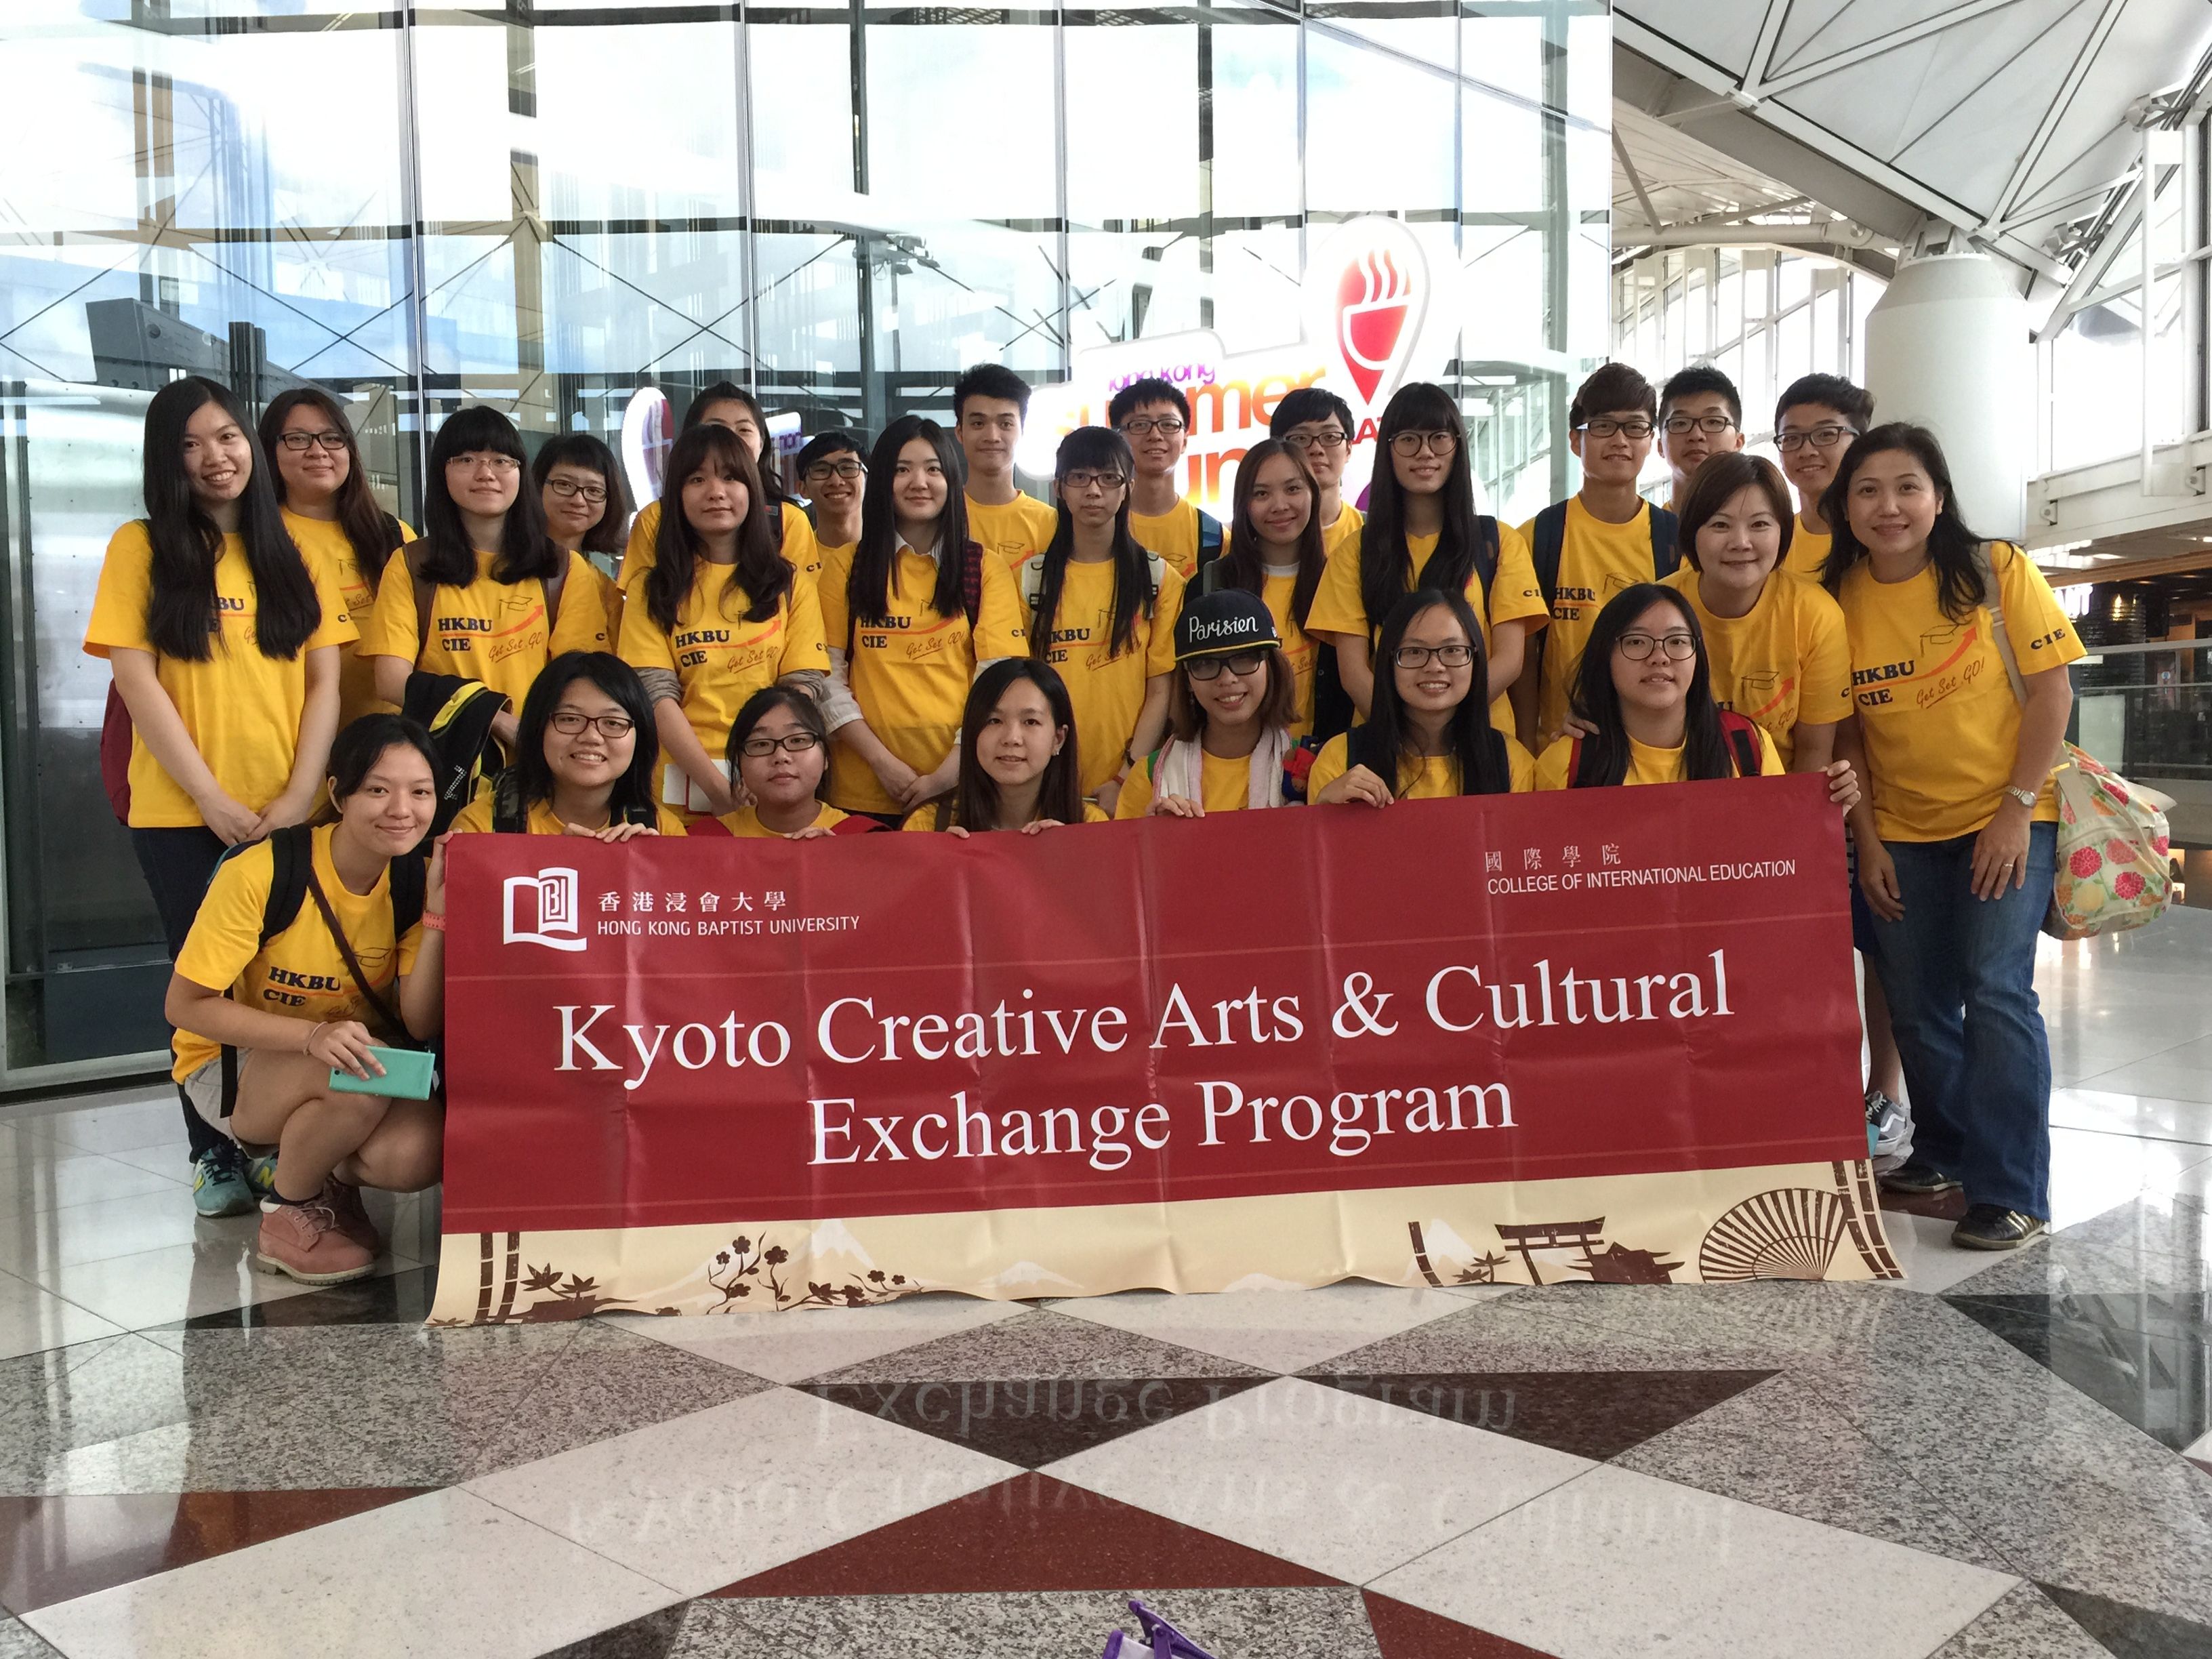 About 100 HKBU CIE students participate in Overseas Cultural Exchange Study Tours and Internship Programme to experience different cultures